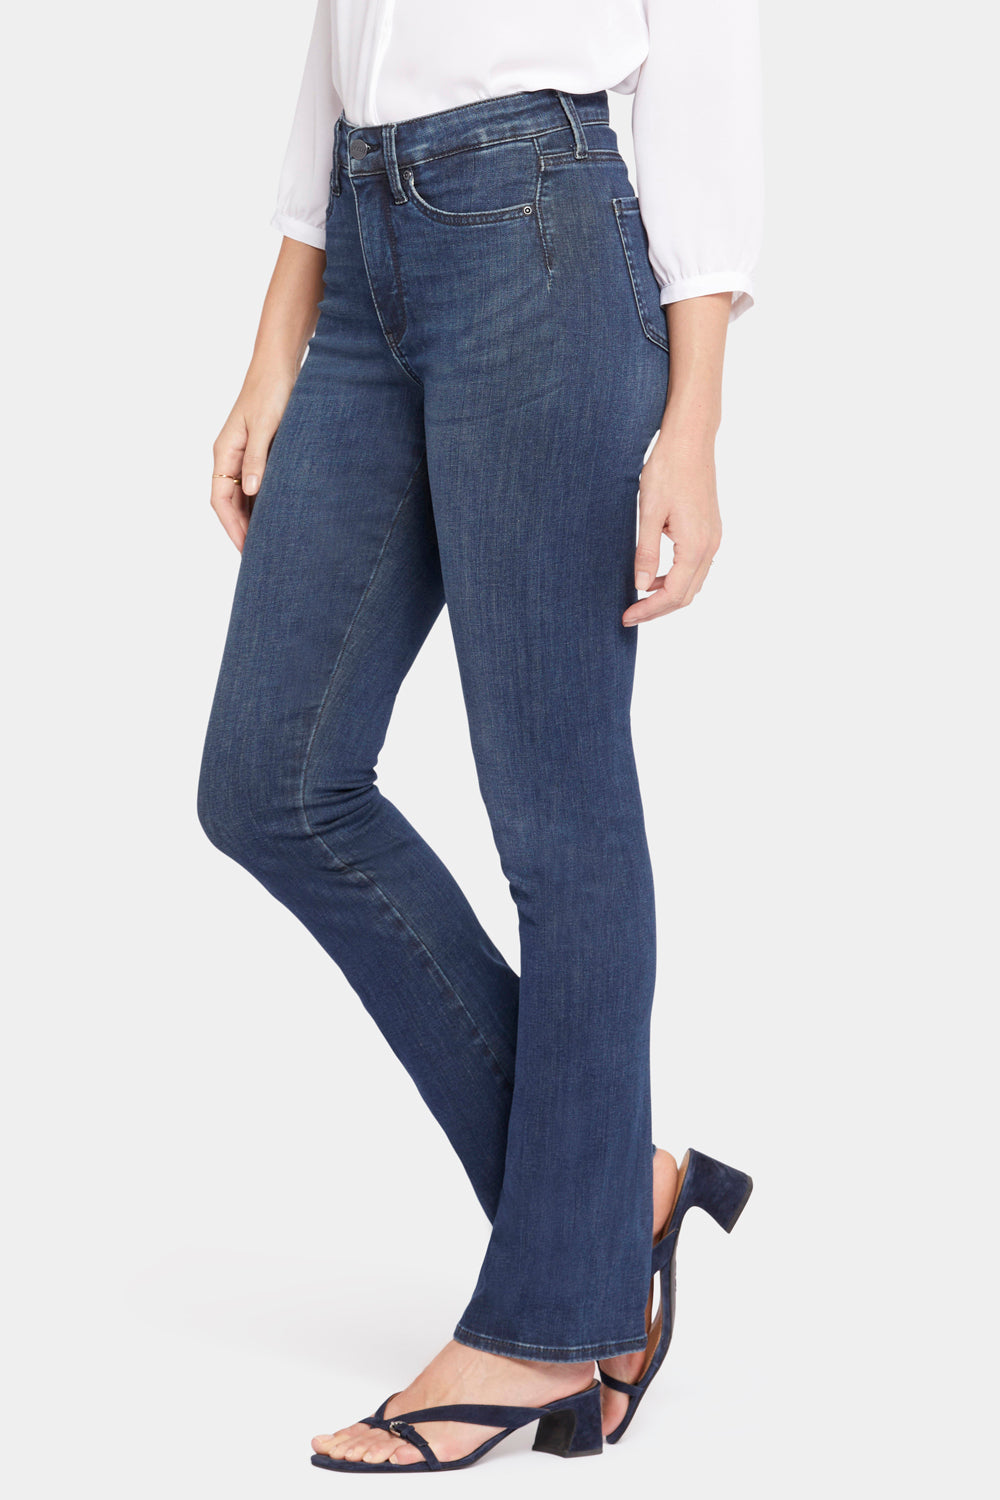 NYDJ Le Silhouette Slim Bootcut Jeans With High Rise - Precious